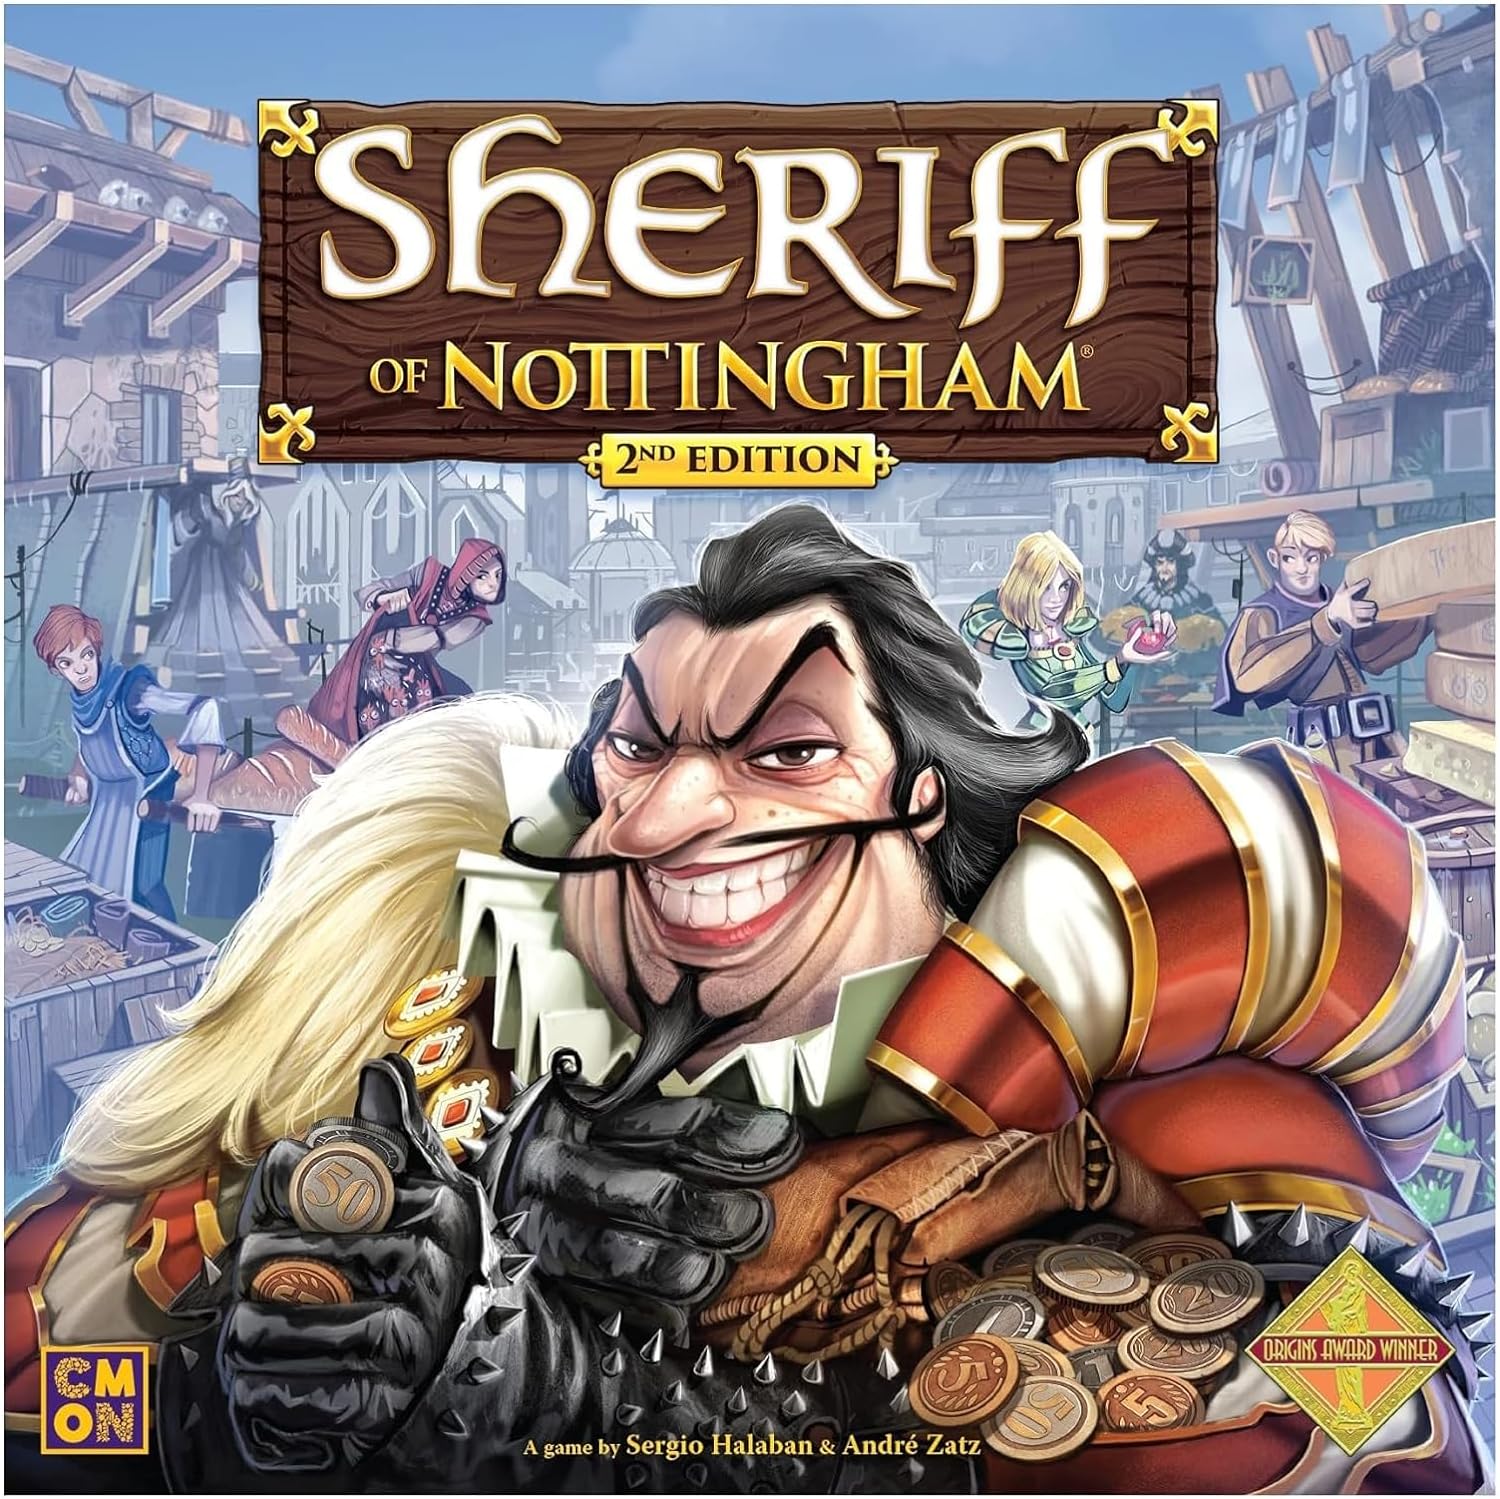 Sheriff of Nottingham 2nd Edition CMON Games. Sold by Board Hoarders